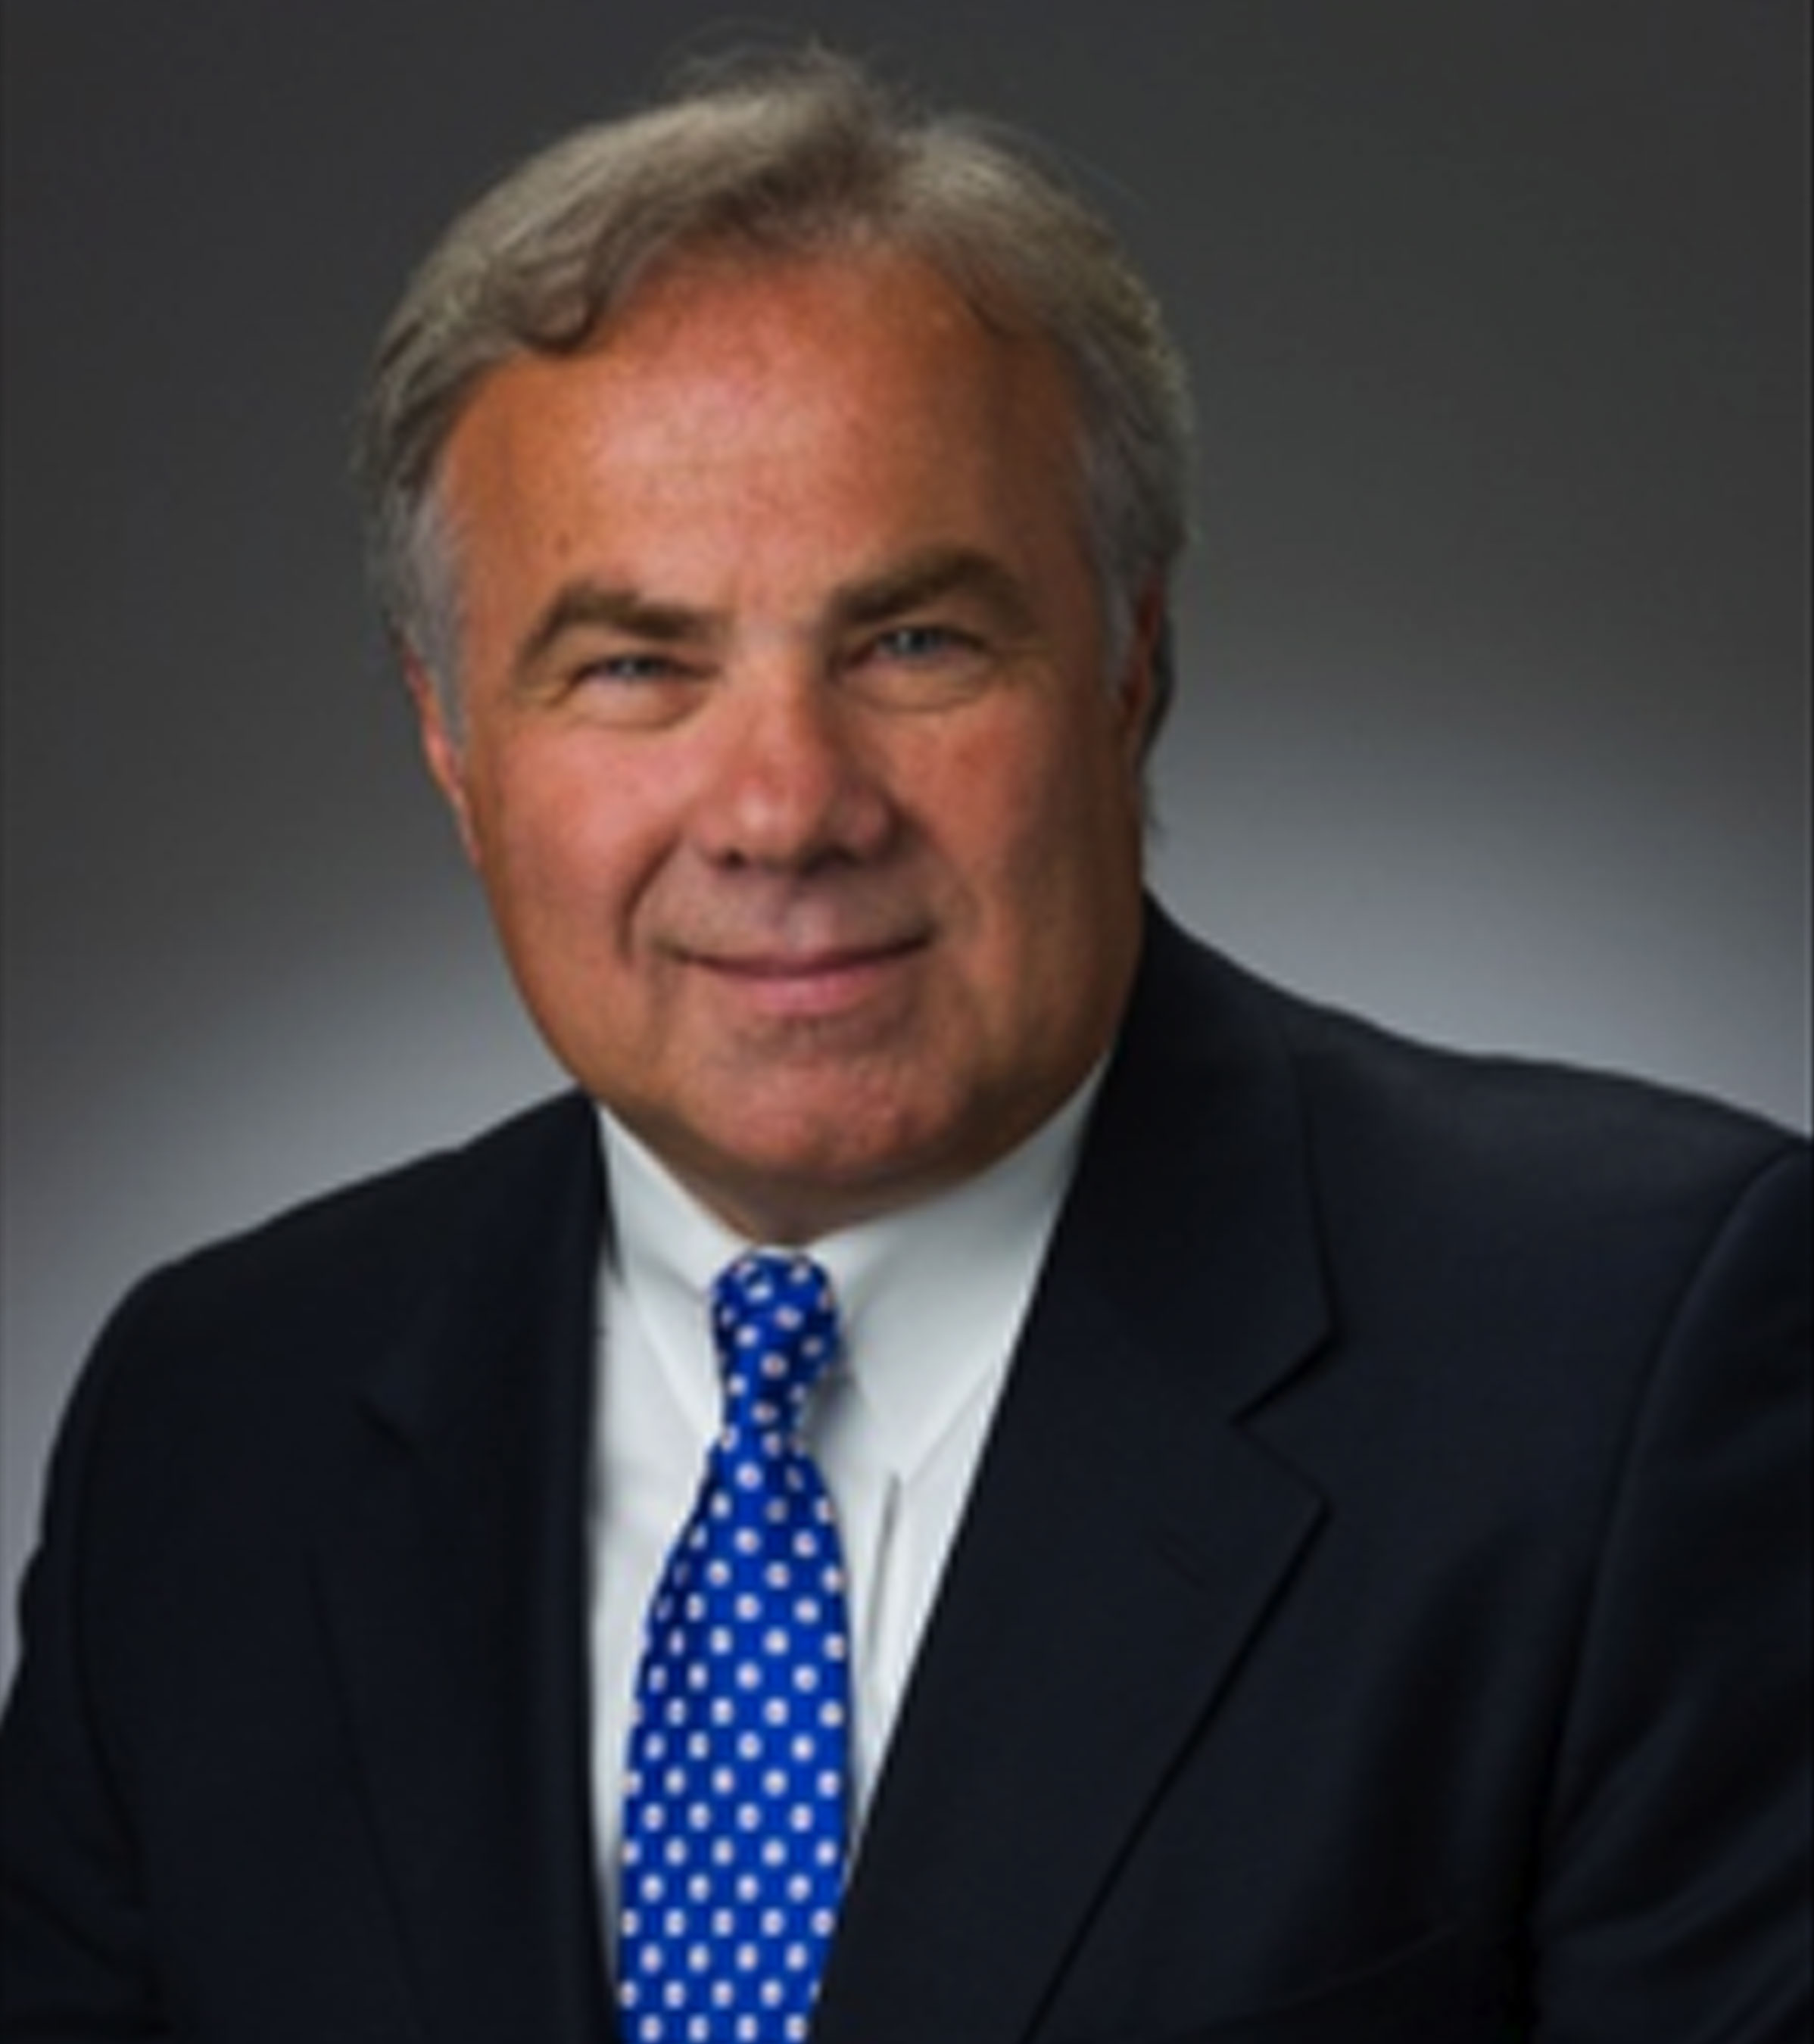 Joseph C. Papa is Chairman of the Board and CEO of Bausch + Lomb